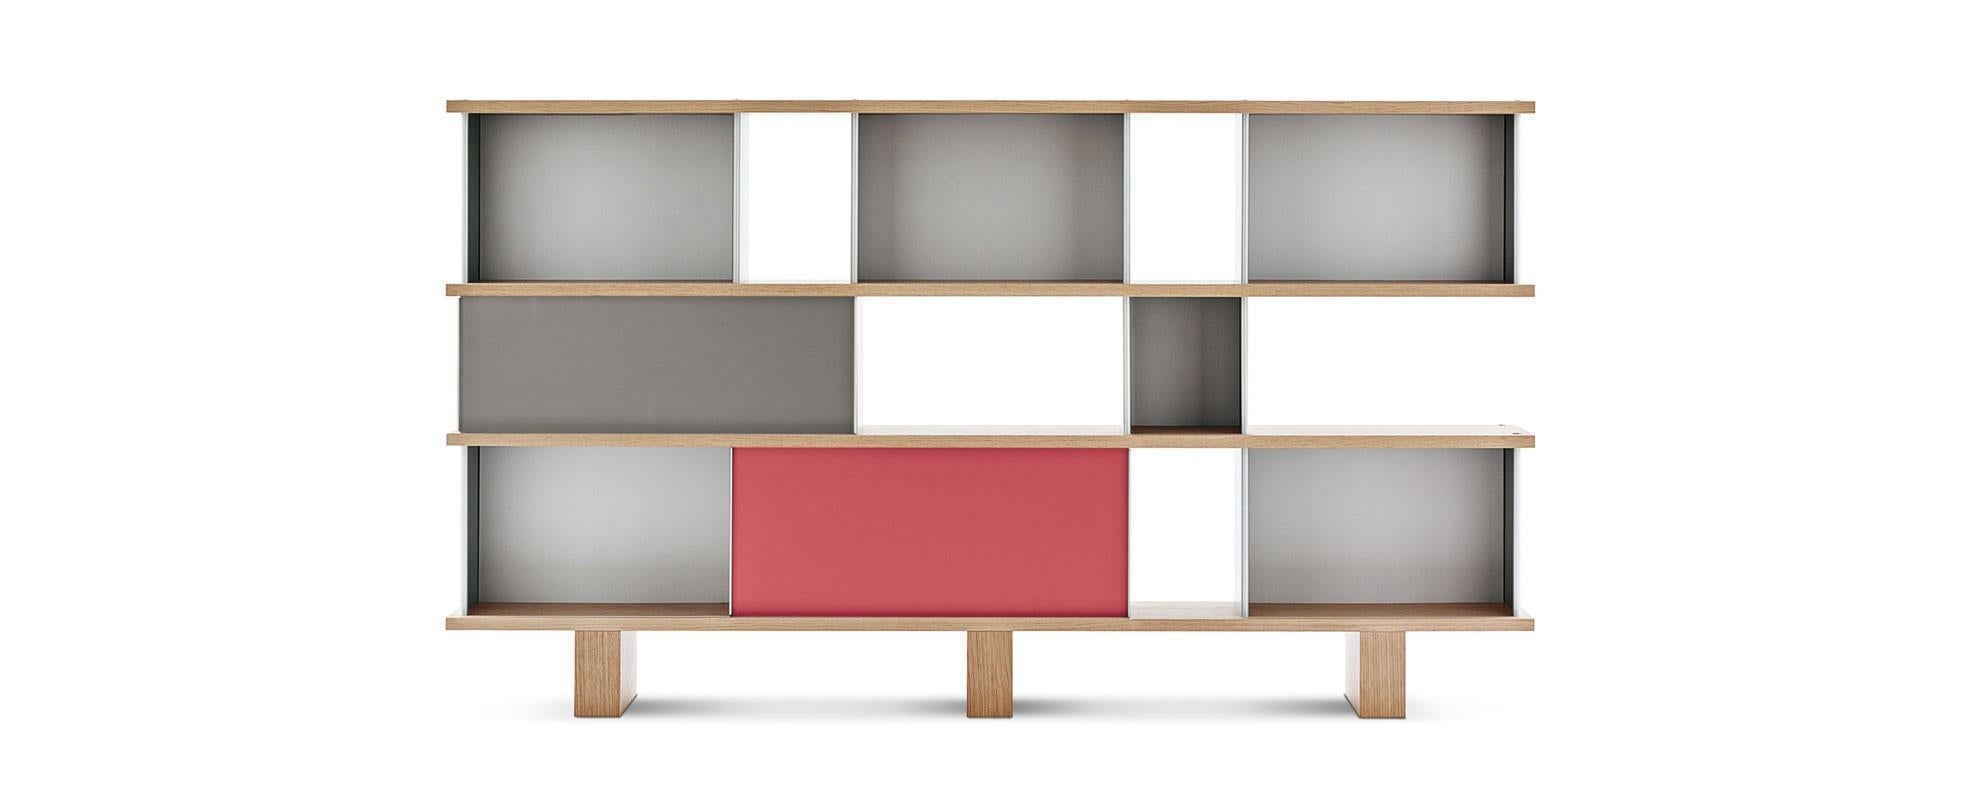 Italian Charlotte Perriand Mid-Century Modern Nuage Shelving Unit by Cassina For Sale